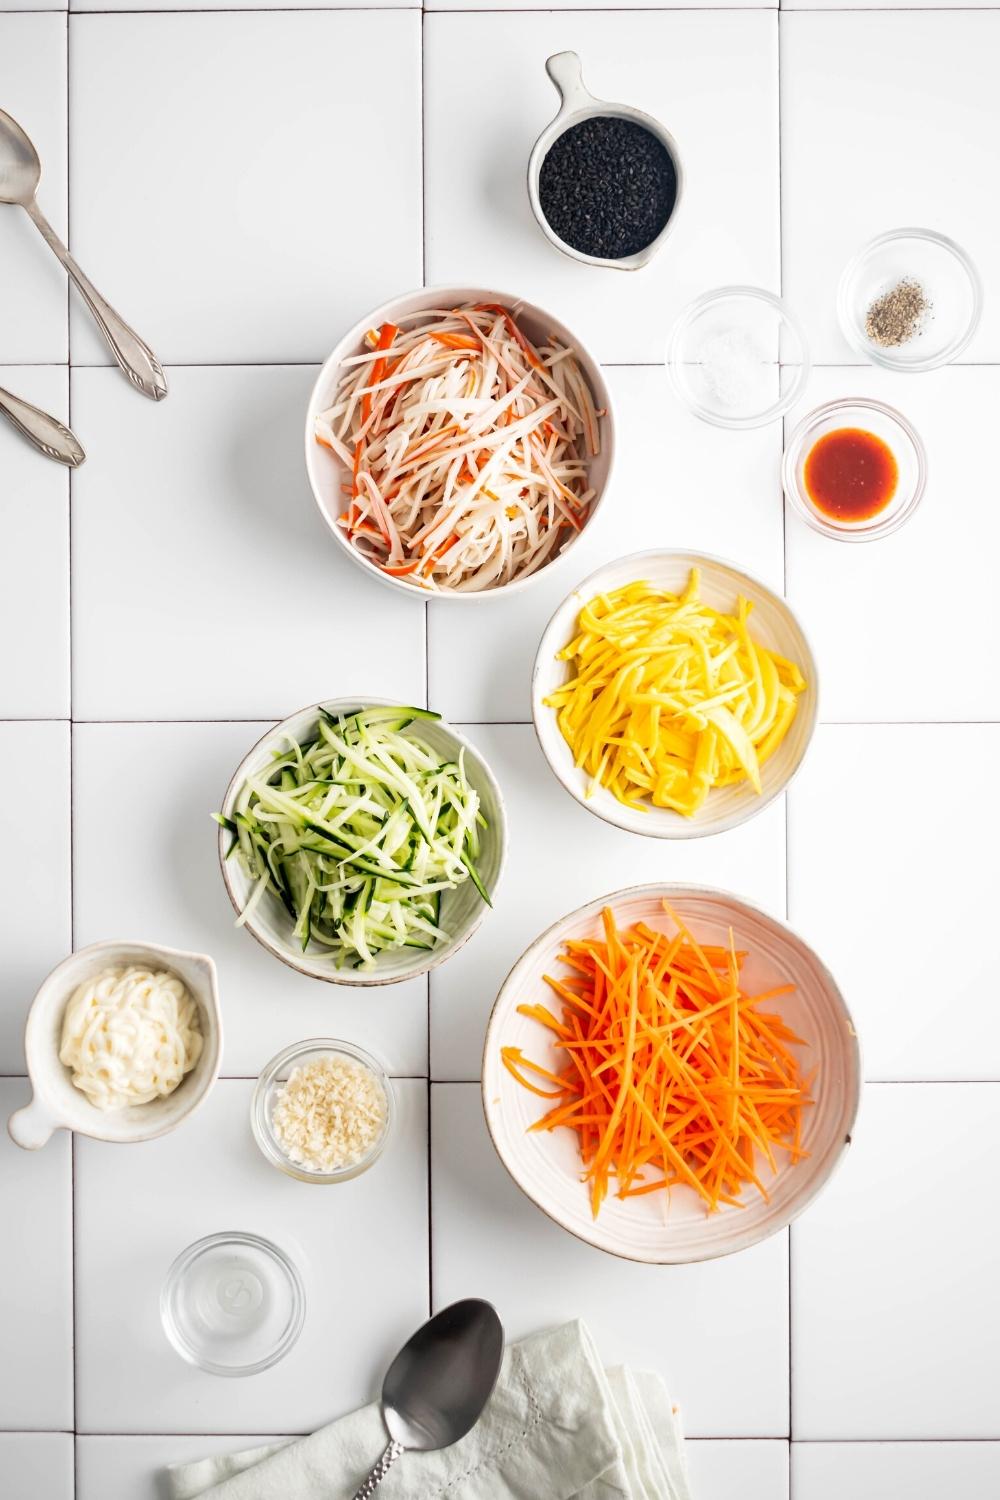 Shredded carrots in a white bowl, shredded cucumber in a white bowl, shredded mango in a white bowl, shredded imitation crab in a white bowl, a bowl of mayonnaise, a bowl of black sesame seeds, and a bowl of sriracha all on a white tile counter.